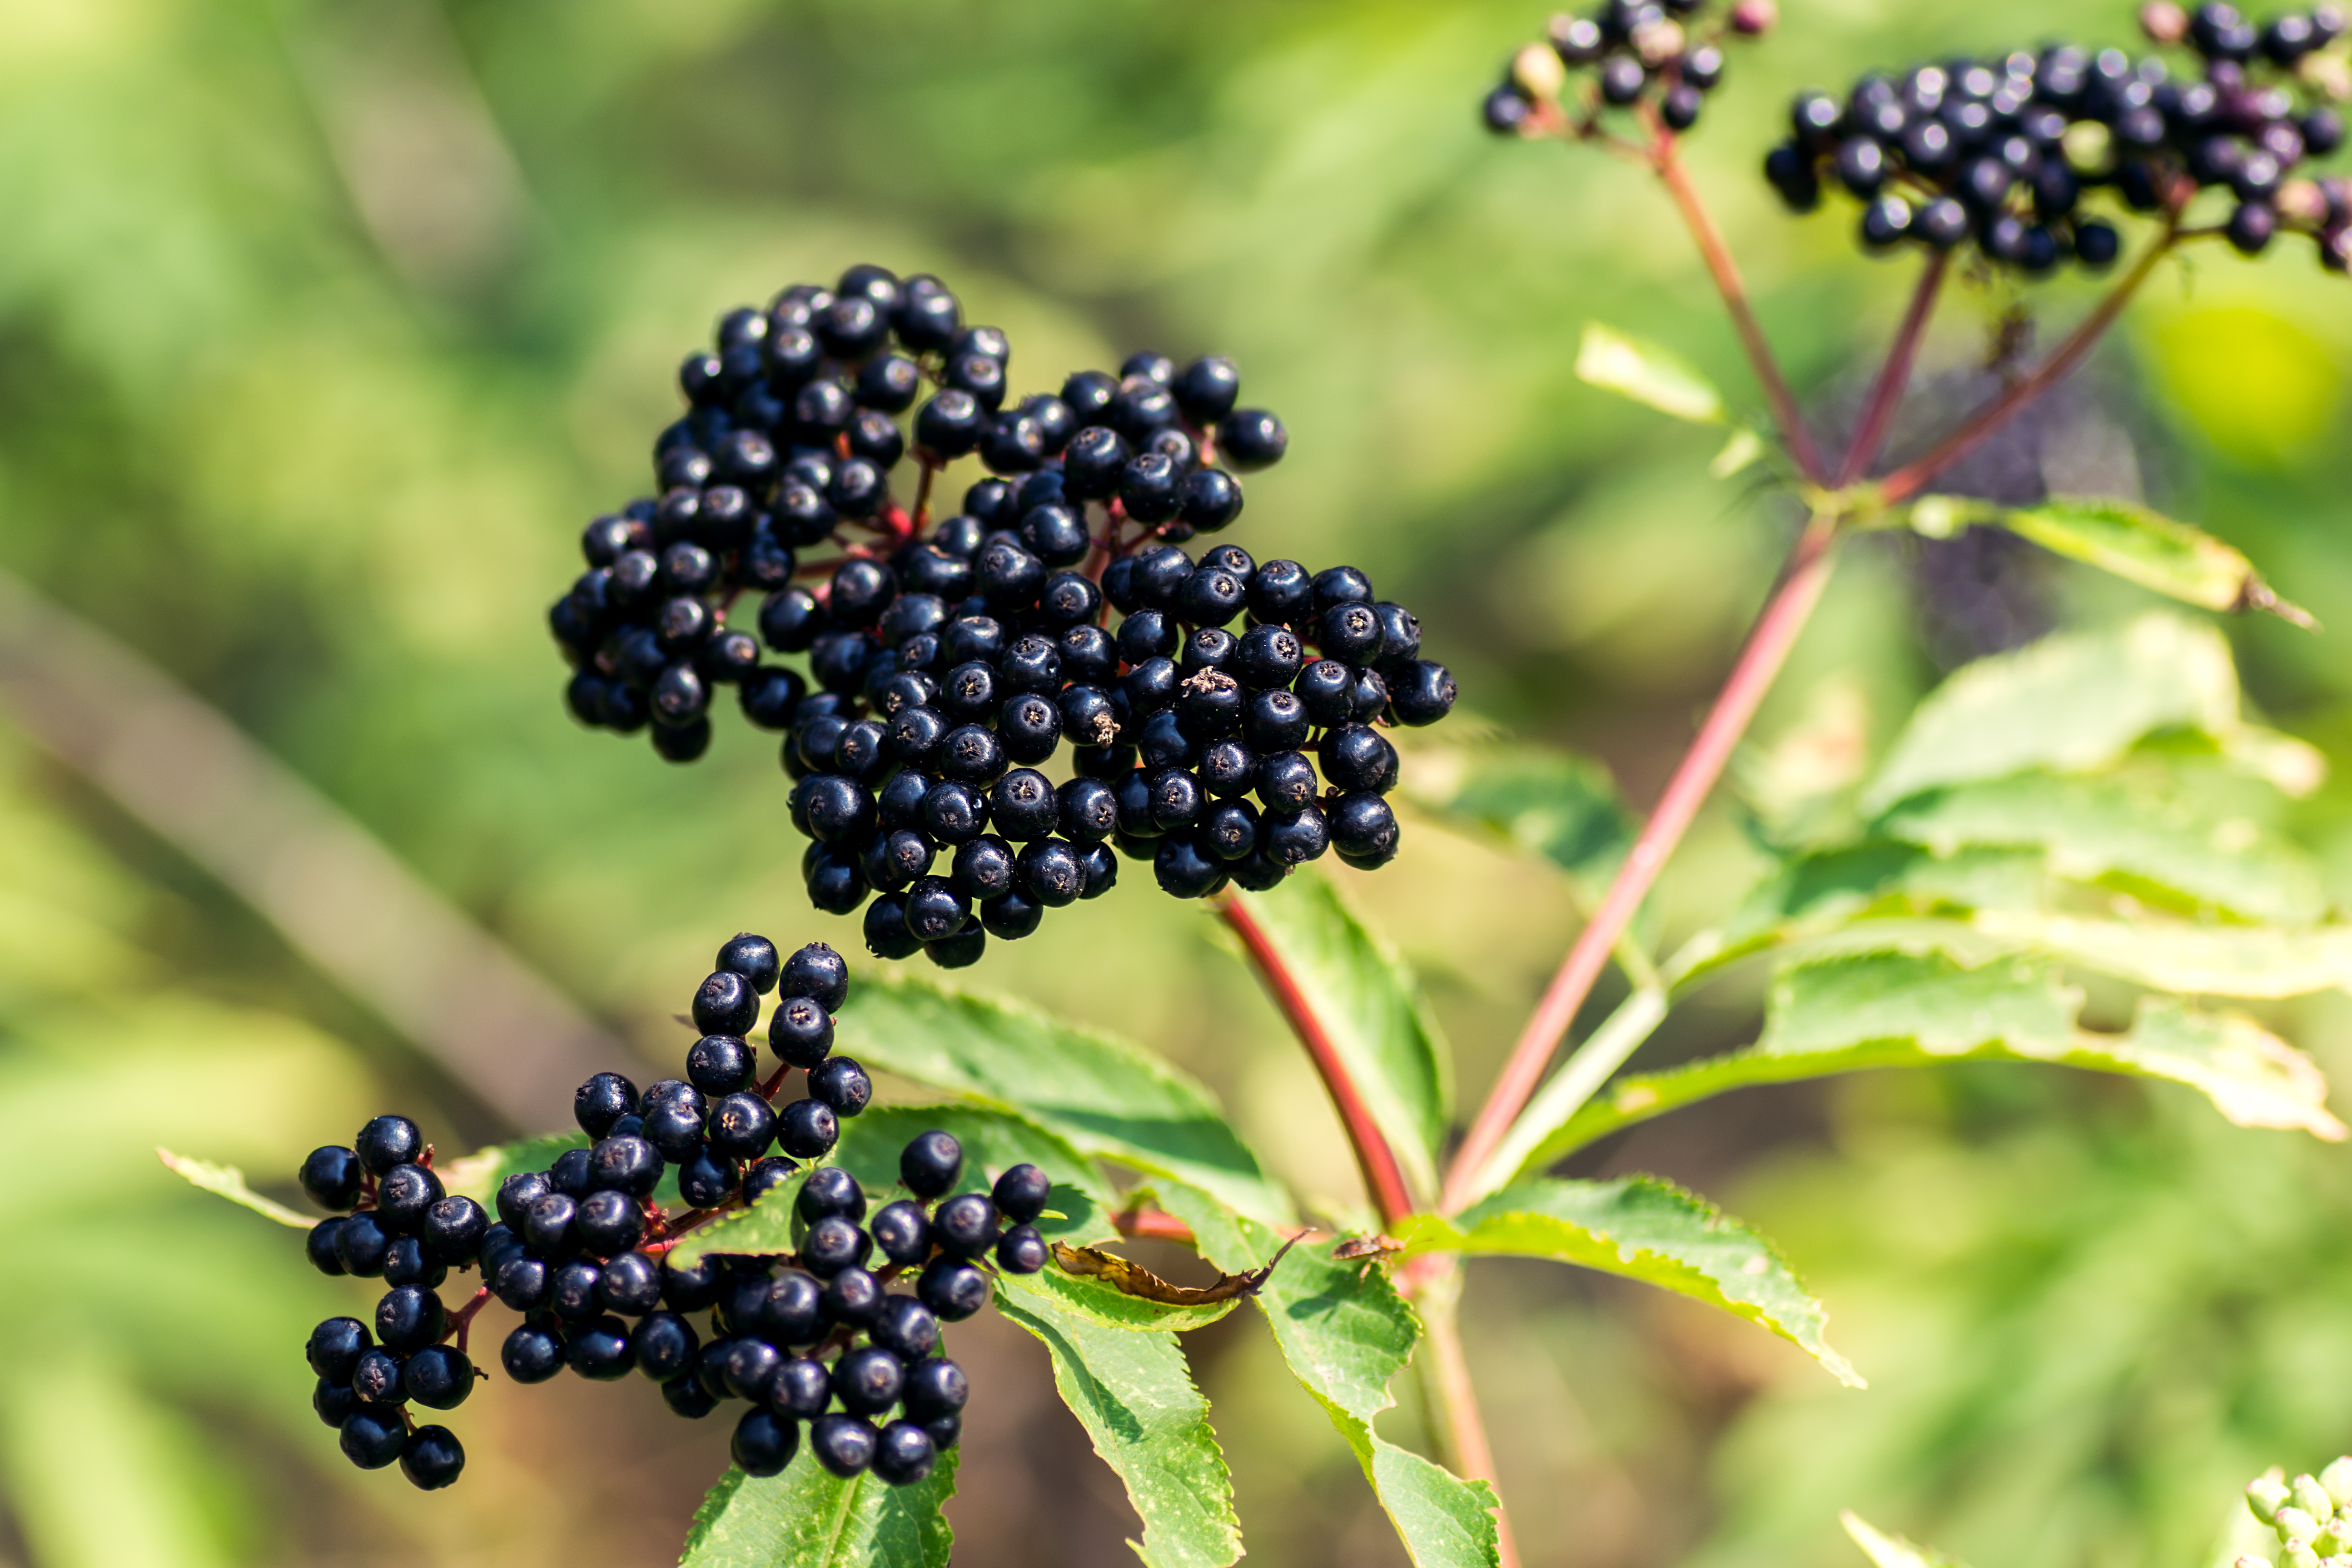 How to Find The Best Elderberry Supplements for Immune Health
